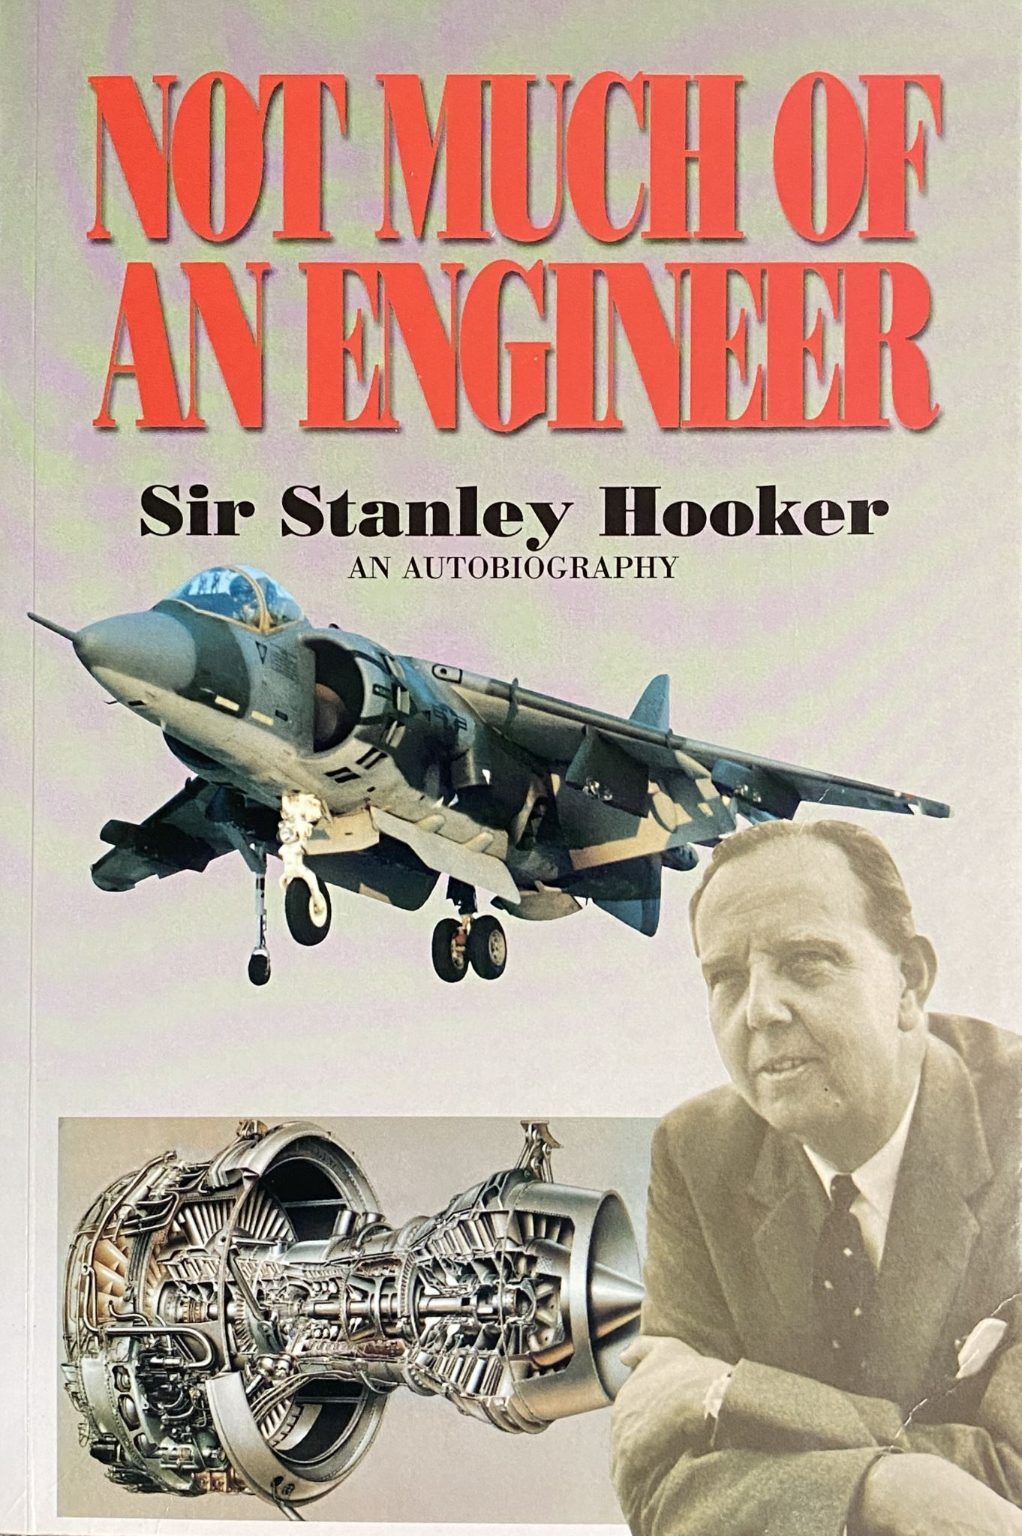 NOT MUCH OF AN ENGINEER: Autobiography of Sir Stanley Hooker